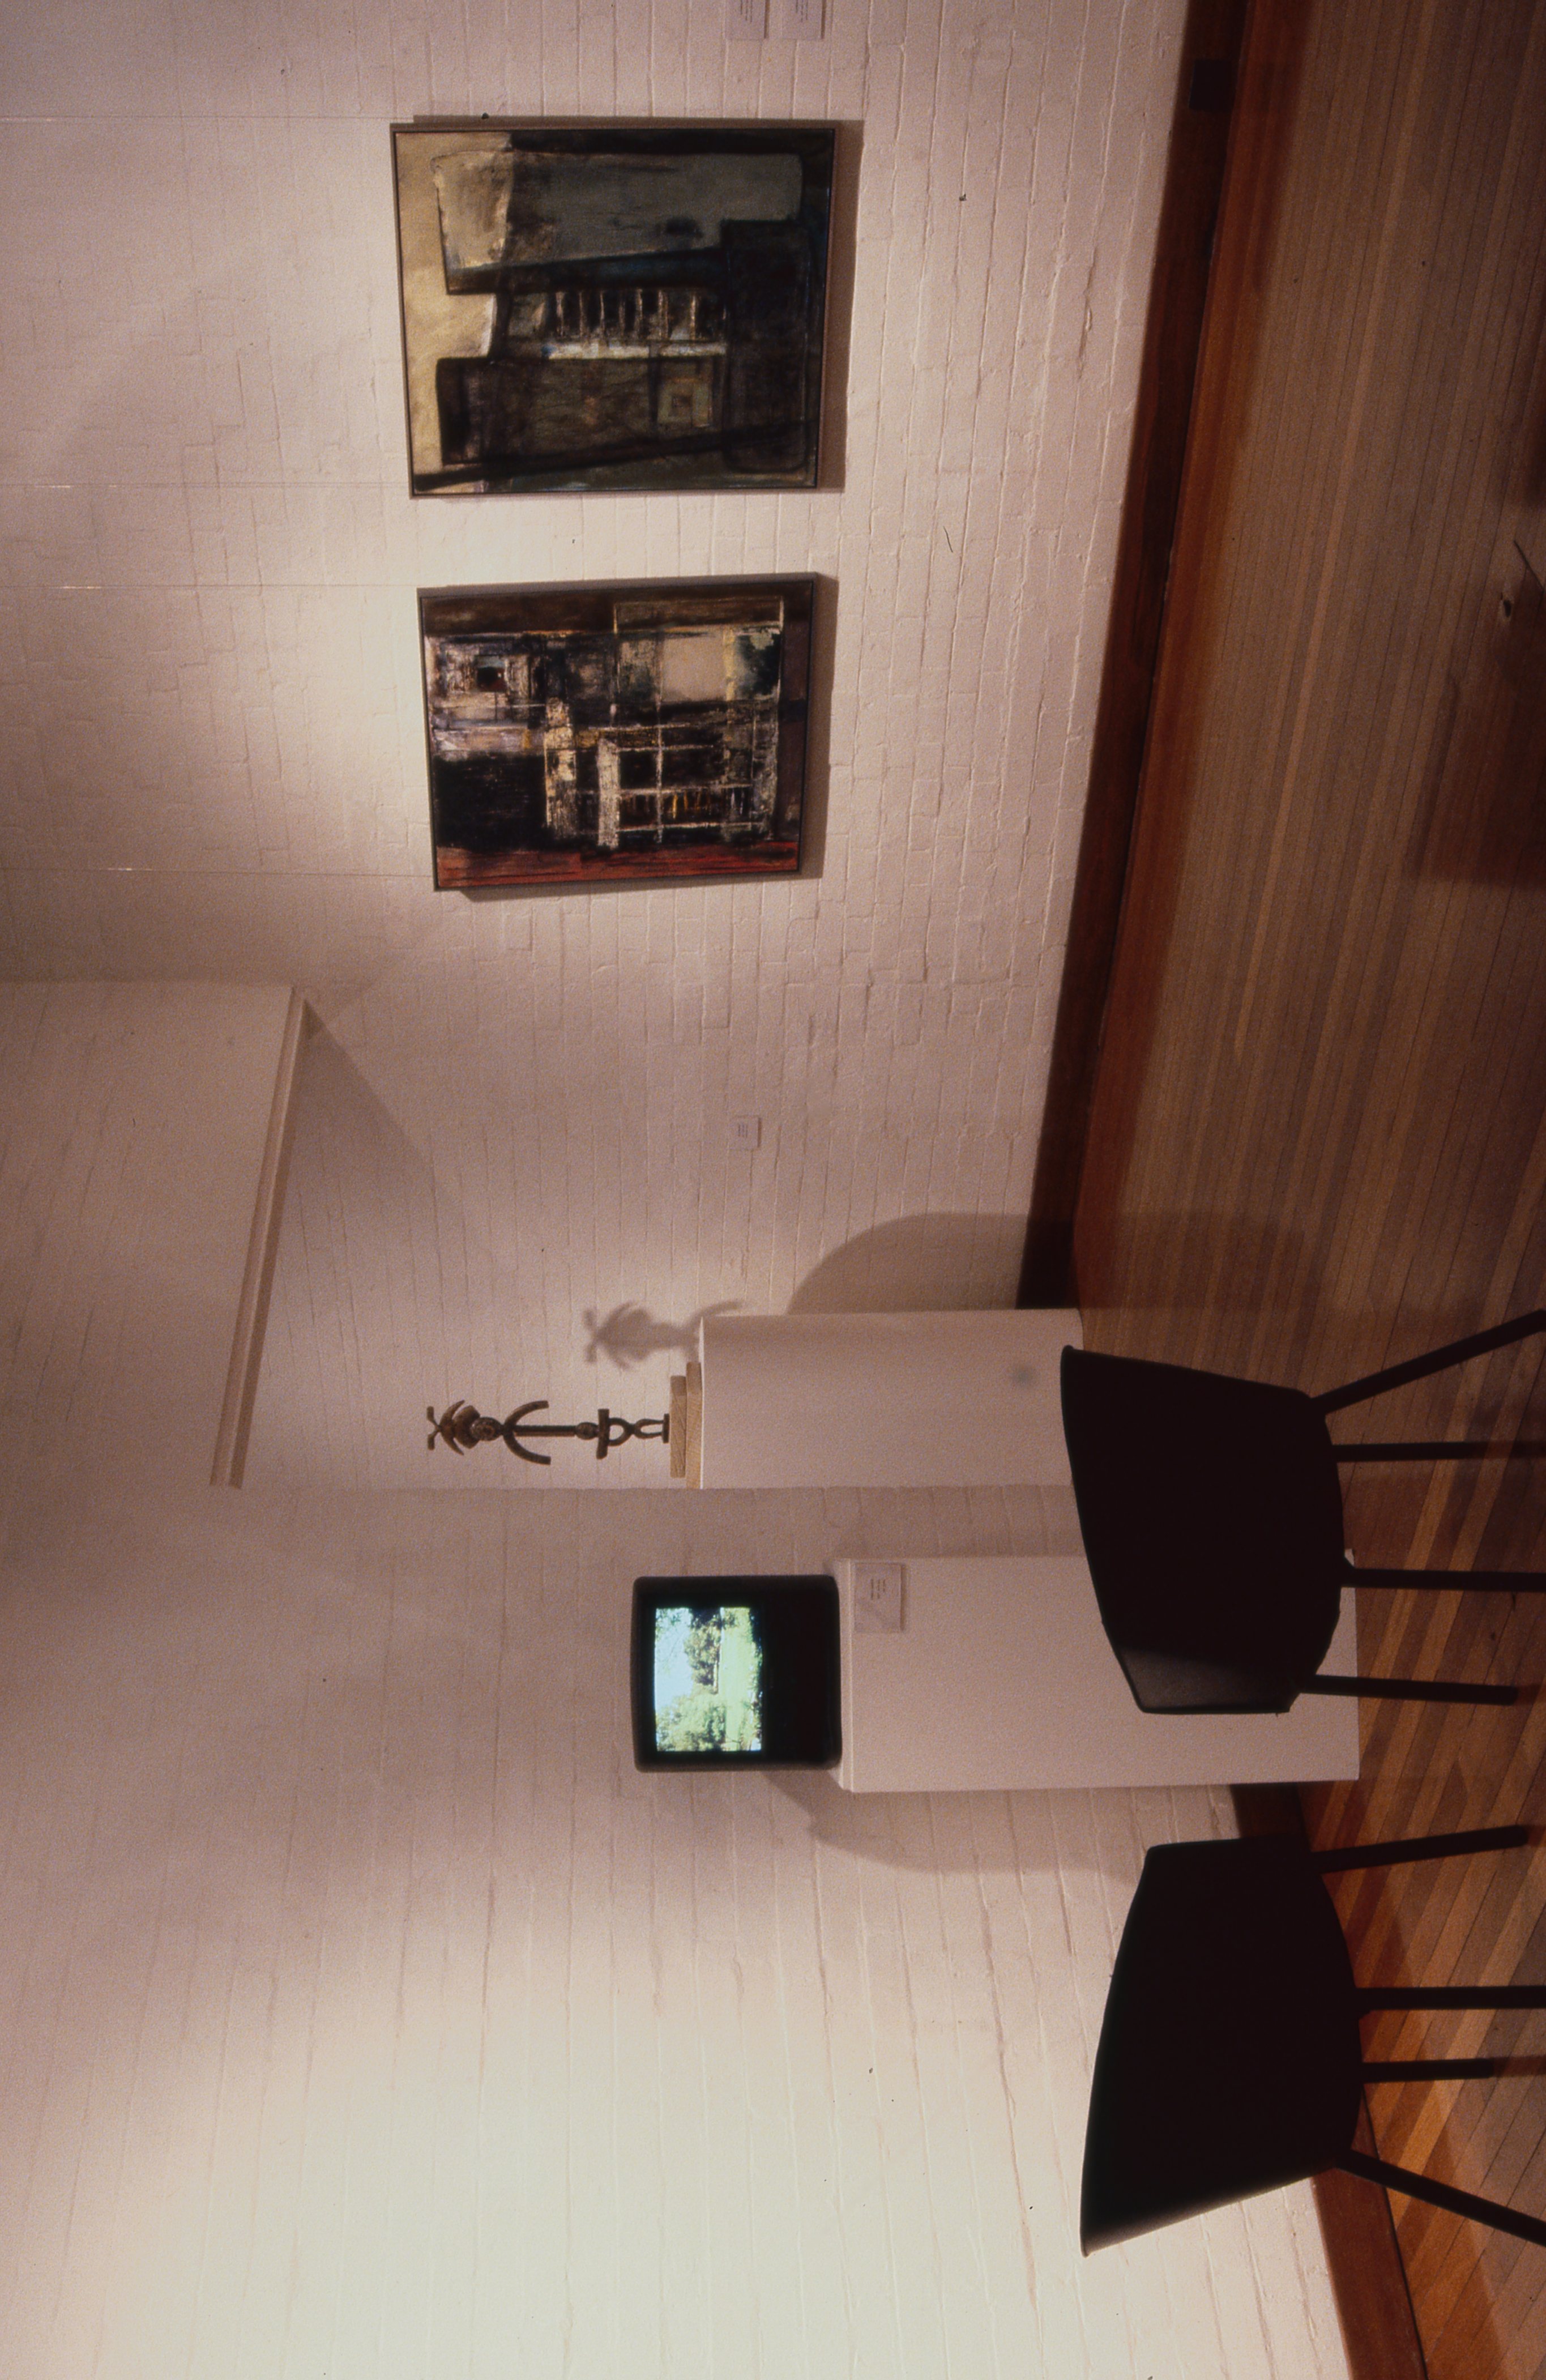 idg_archive_1999_shifting_currents_college_of_fine_arts_faculty_004_install.jpg